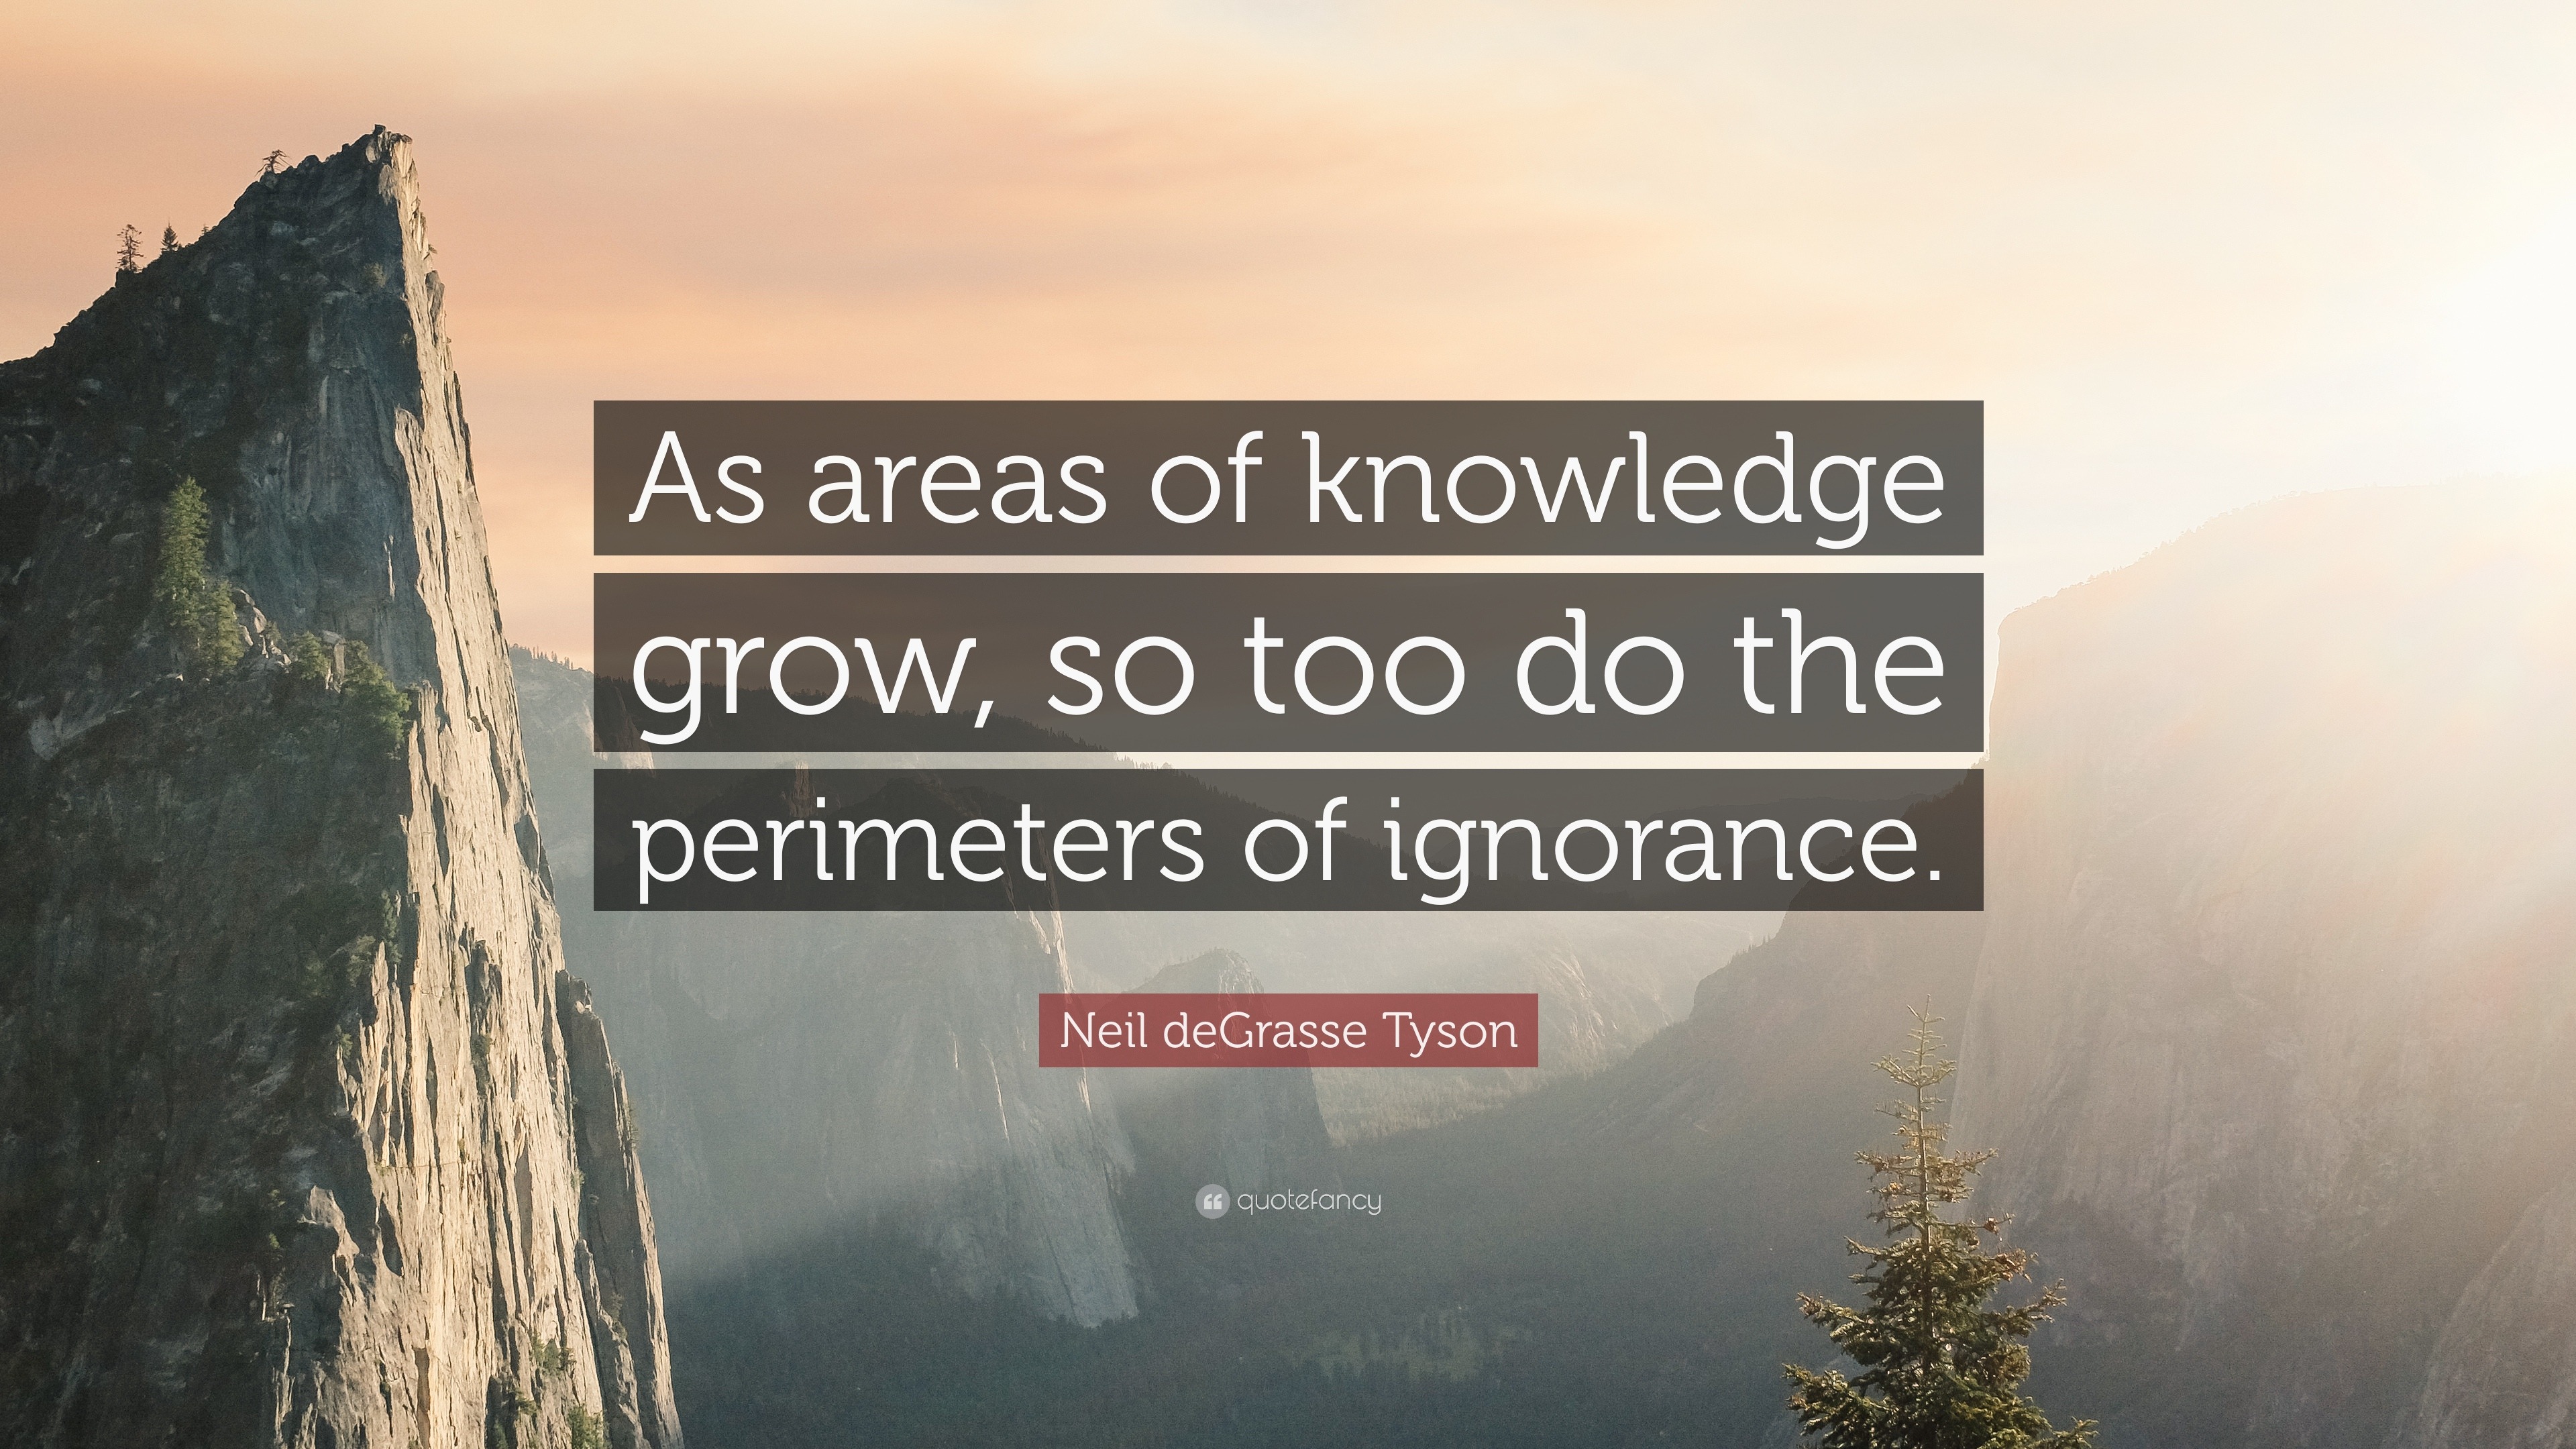 Neil deGrasse Tyson Quote “As areas of knowledge grow so too do the